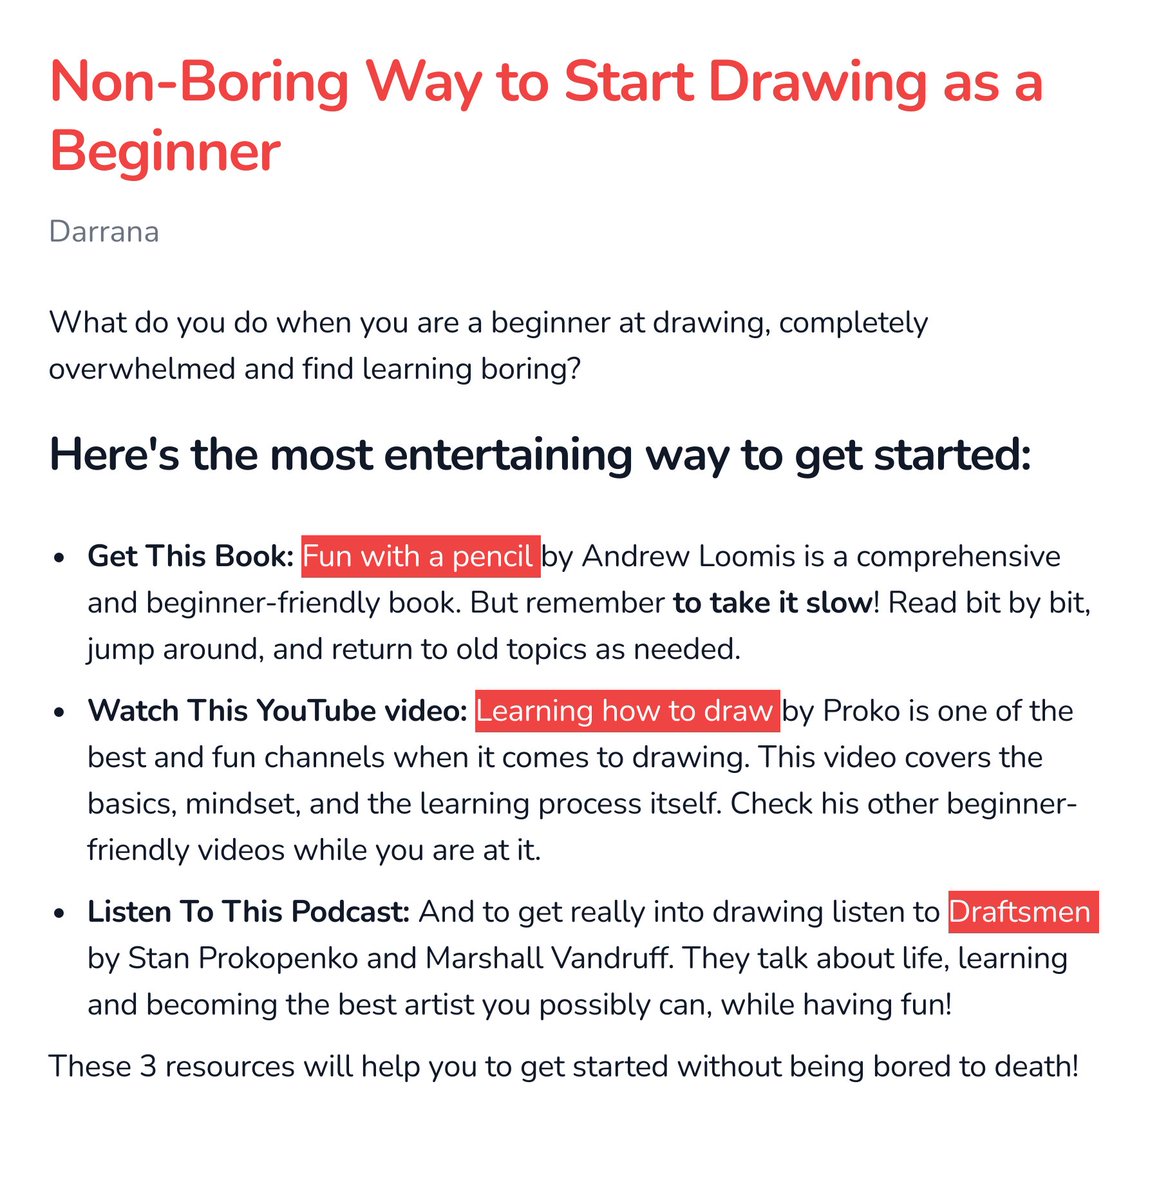 Non-Boring Way to Start Drawing as a Beginner

#learntodraw